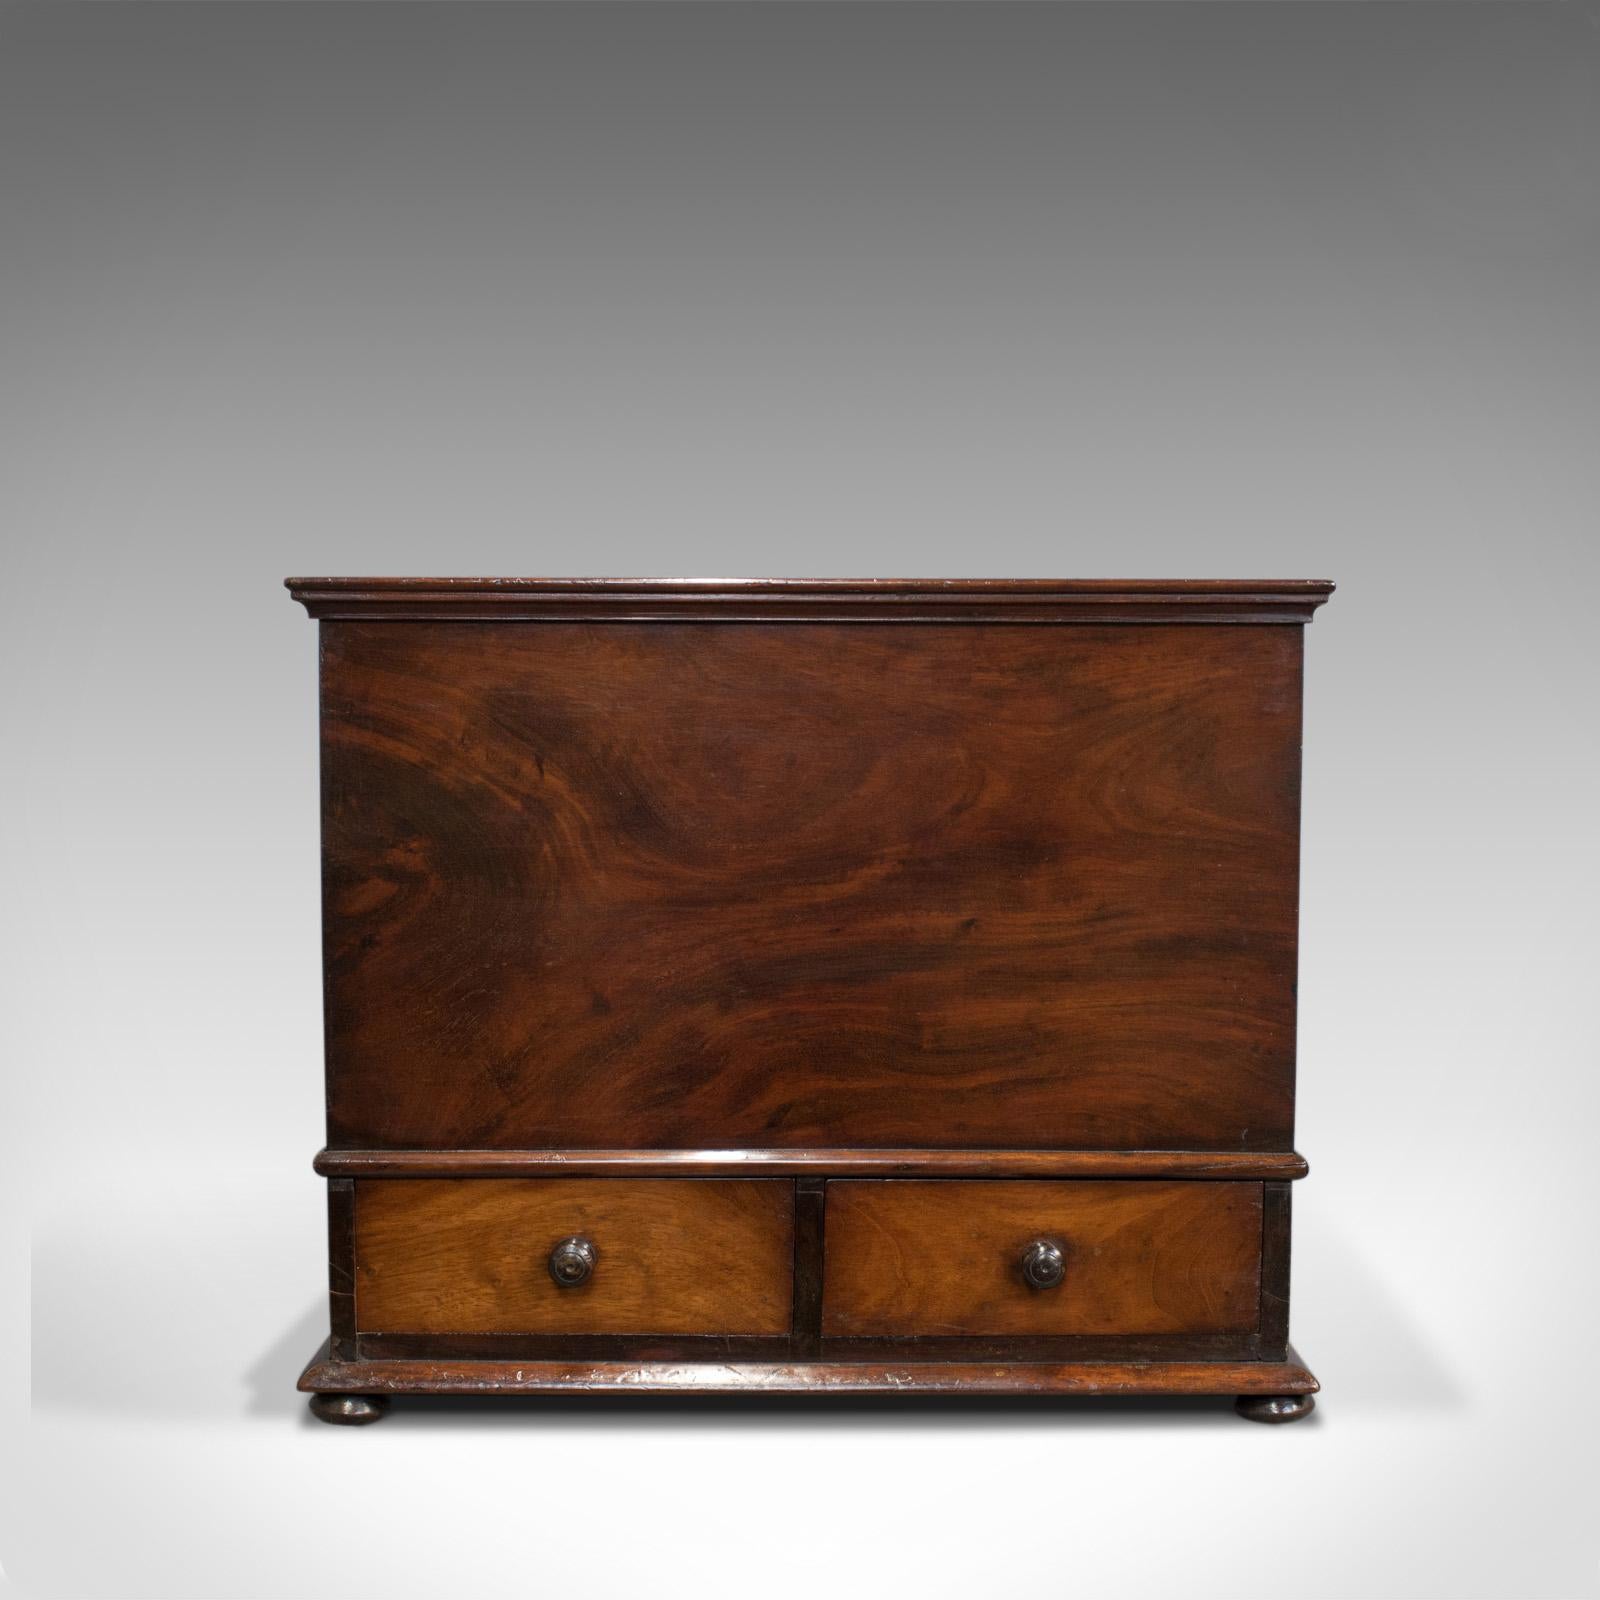 This is an antique officer's chest. An English, Victorian storage box crafted in flame mahogany dating to the mid-19th century, circa 1850.

Flame mahogany displaying good consistent color and grain interest
In superb original condition with a